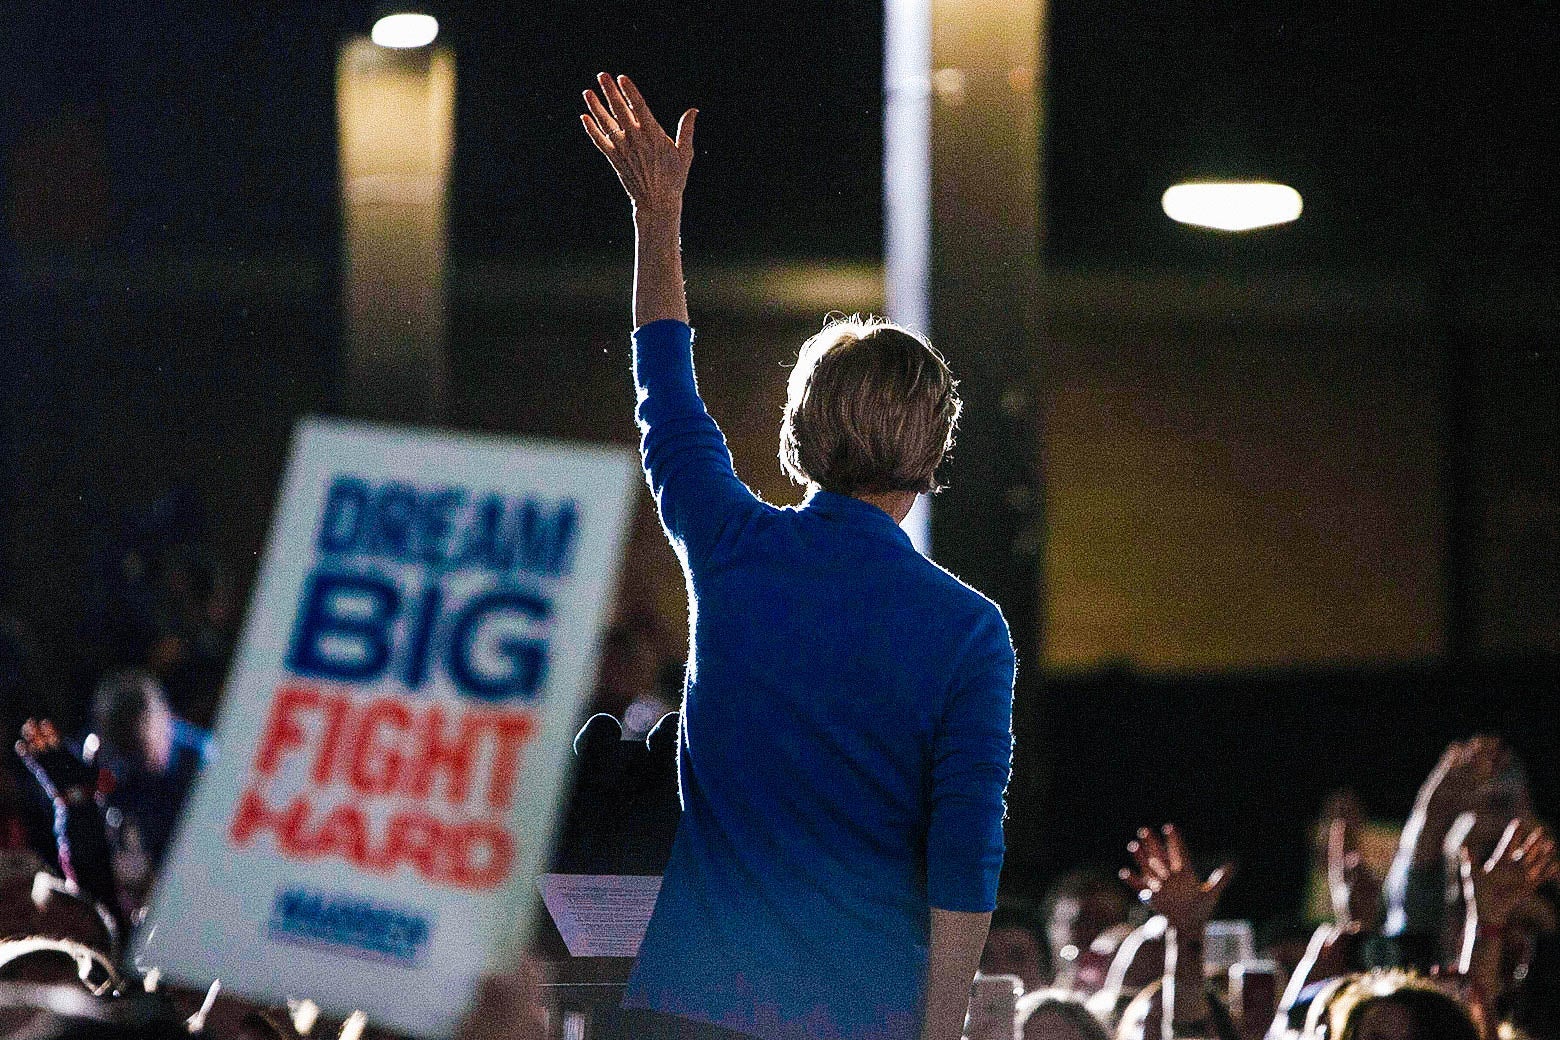 Sen. Elizabeth Warren waves to supporters at a rally, back turned.